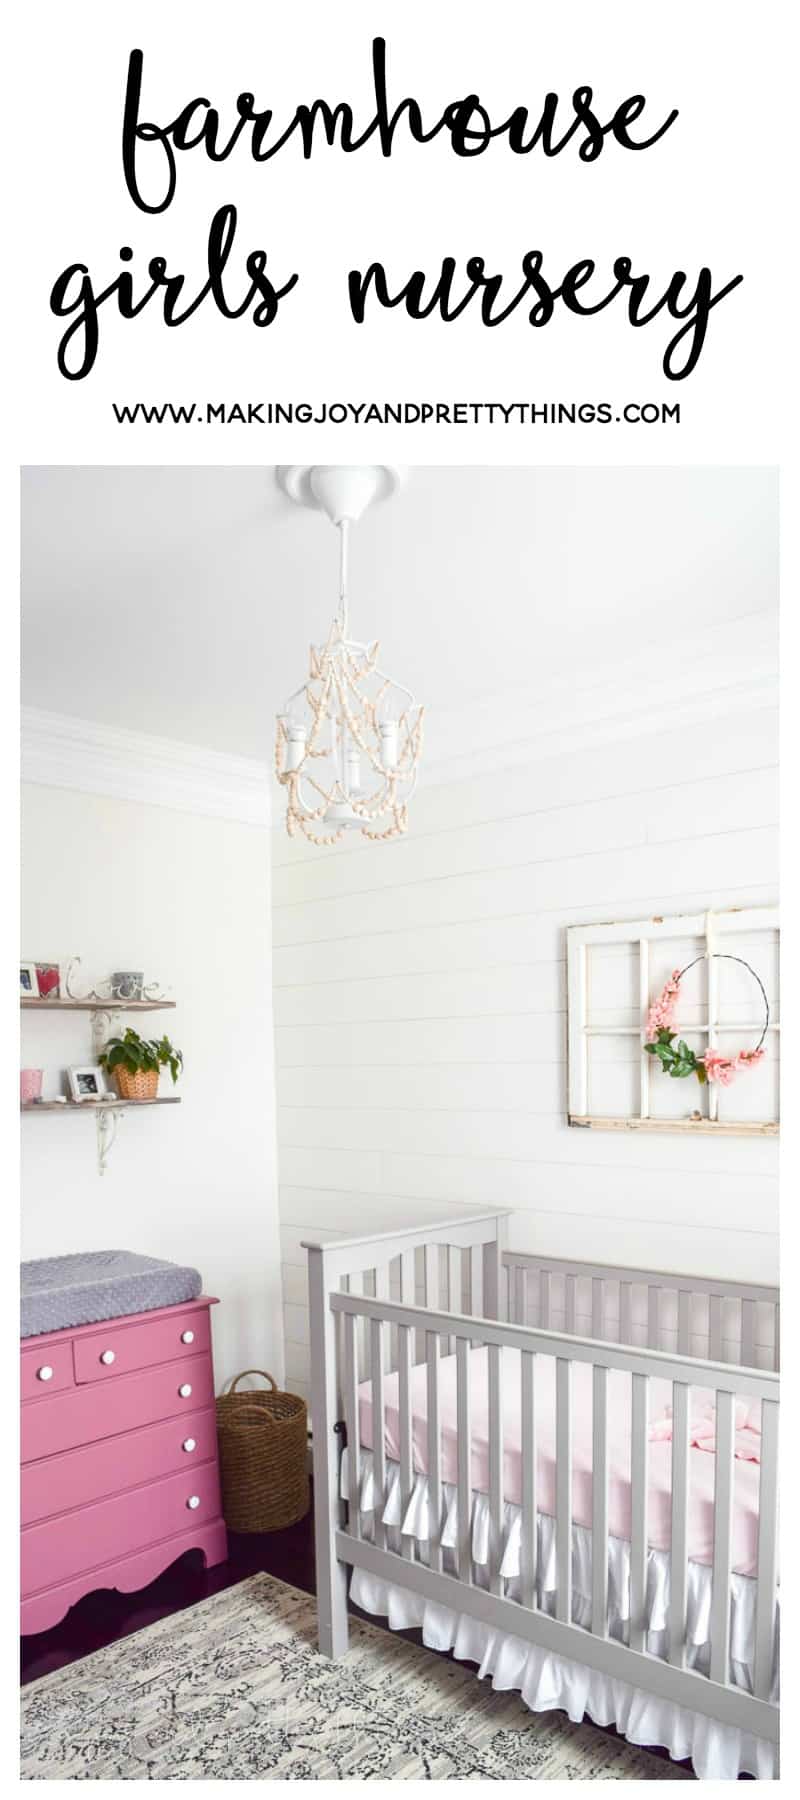 Completed reveal showing off farmhouse nursery ideas for a girls room with shiplap and other antique finishes